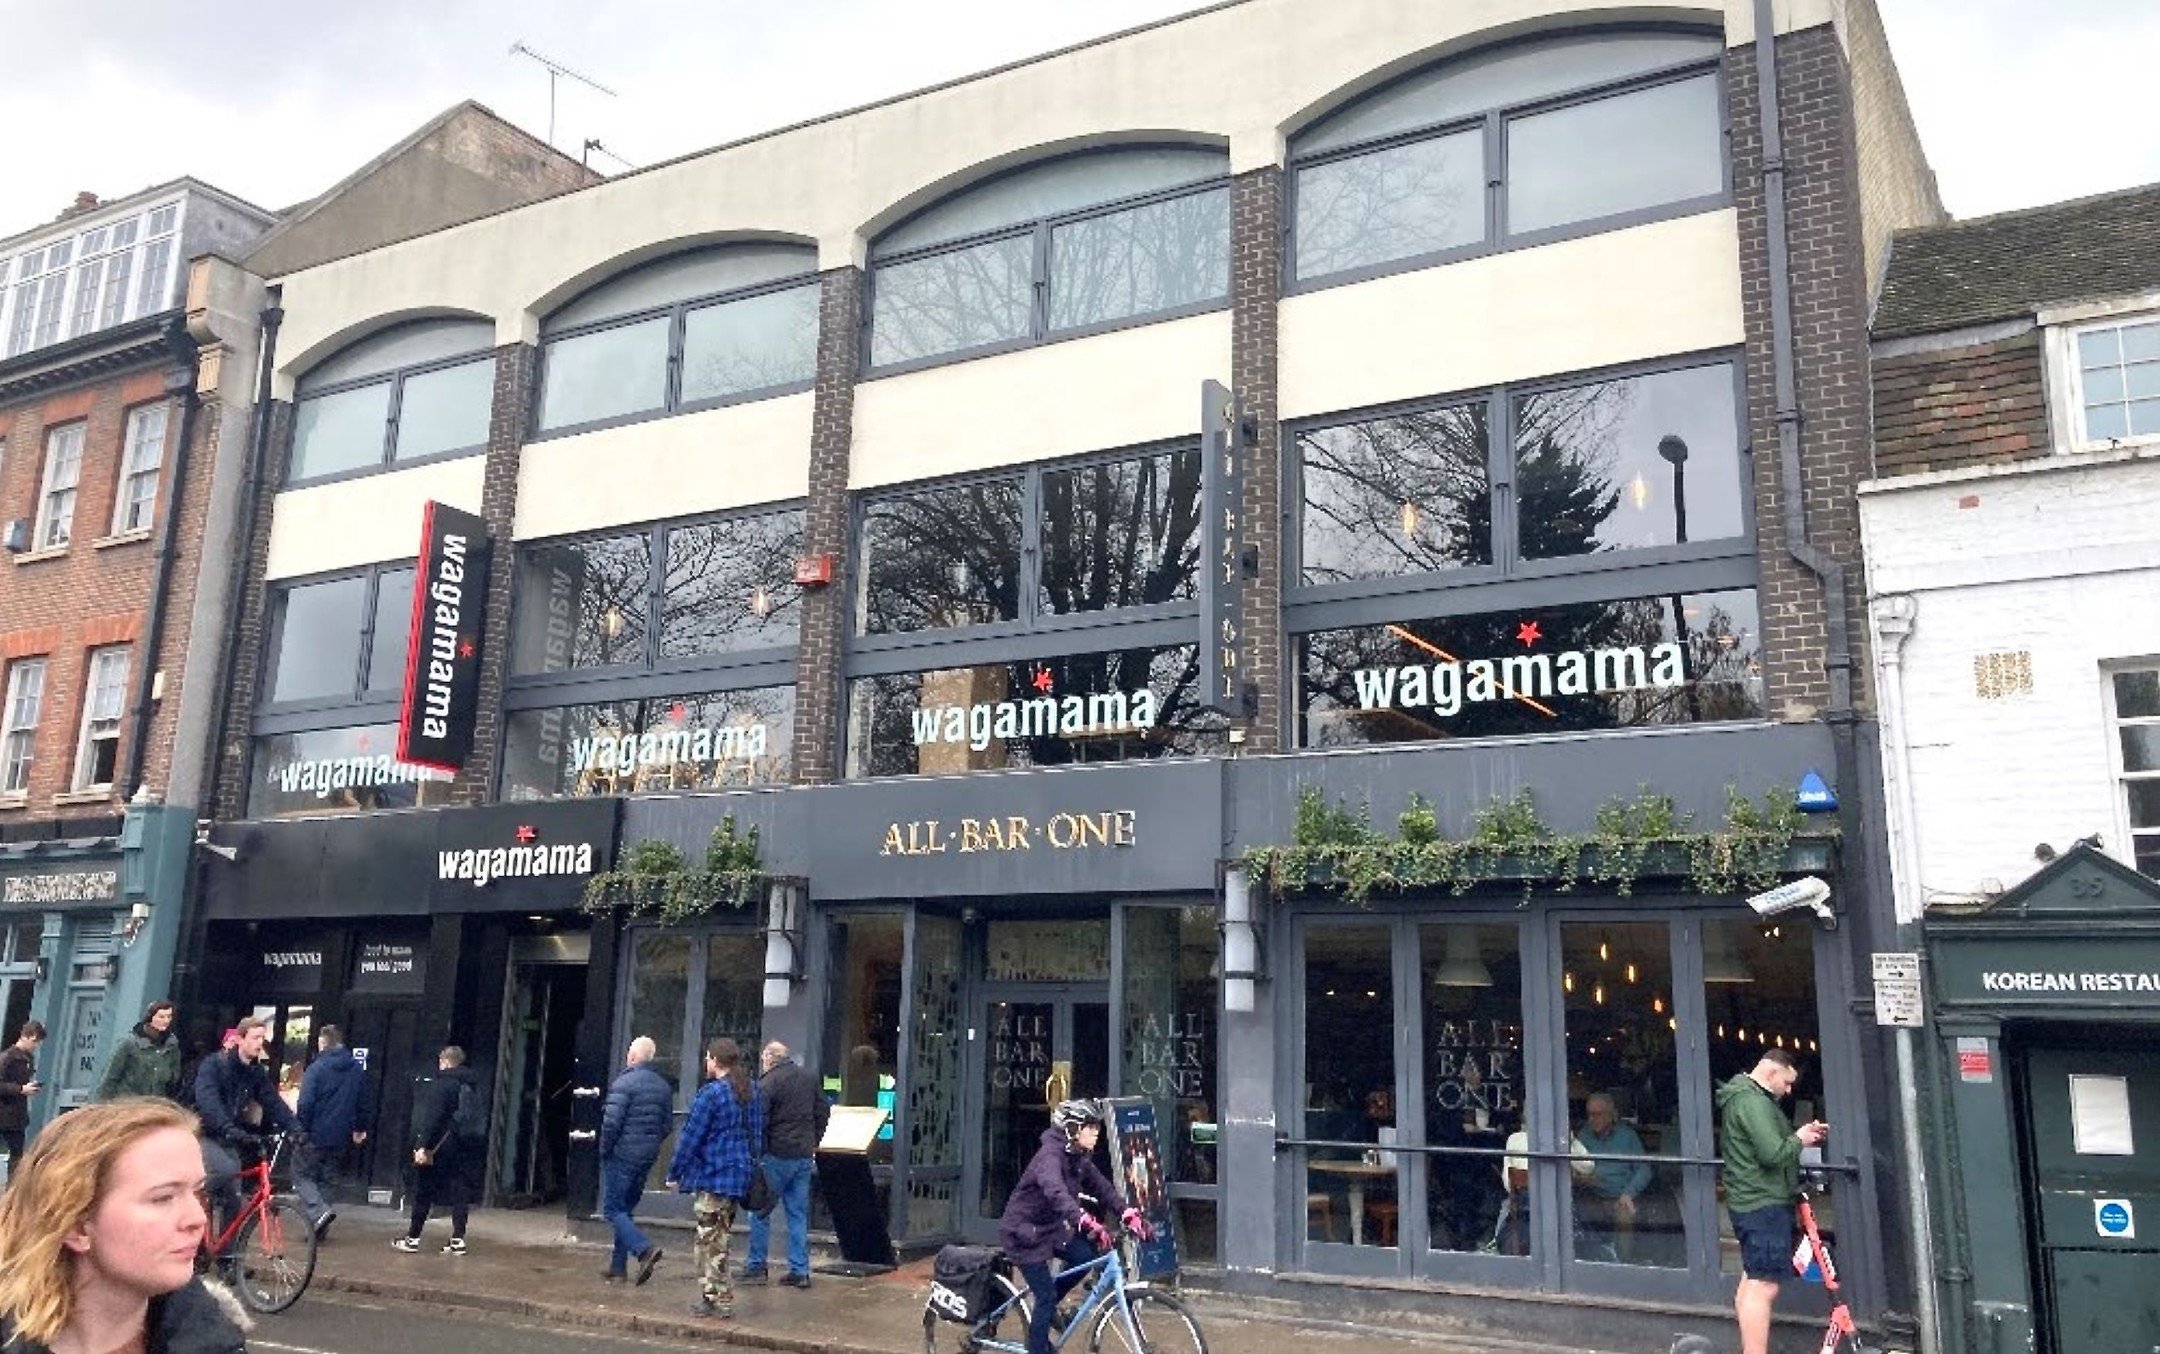 MORE SITES NEEDED! Delighted to announce that we have acquired our first site for leading competitive socialising operators @boombattlebar and @escapehuntuk at St Andrew&rsquo;s Street, Cambridge (ex-All Bar One and Wagamama). More opportunities requ